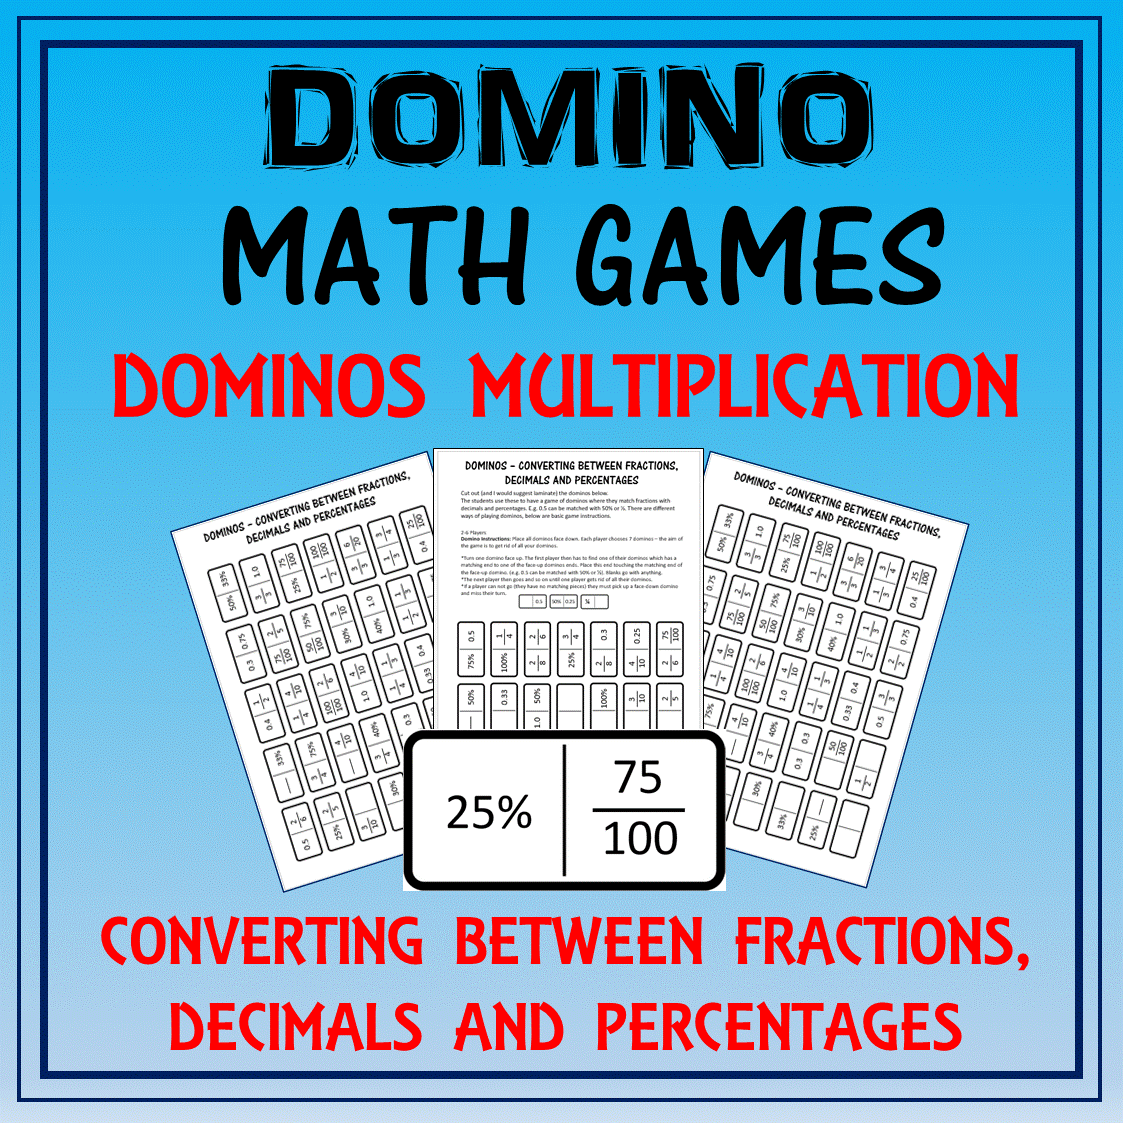 Domino math activity. Converting between fractions, decimals, and percentages. Math games make learning math fun and in this game students have to match up fractions with decimals and percentages. This game/activity will be a great addition to your elementary or middleschool classroom and can be used as a fun math starter, or in a math center. #mathgames #elementary #mathactivities #middleschool #mathactivity #grade5 #grade6 #games #decimals #activities #fractions #percentages